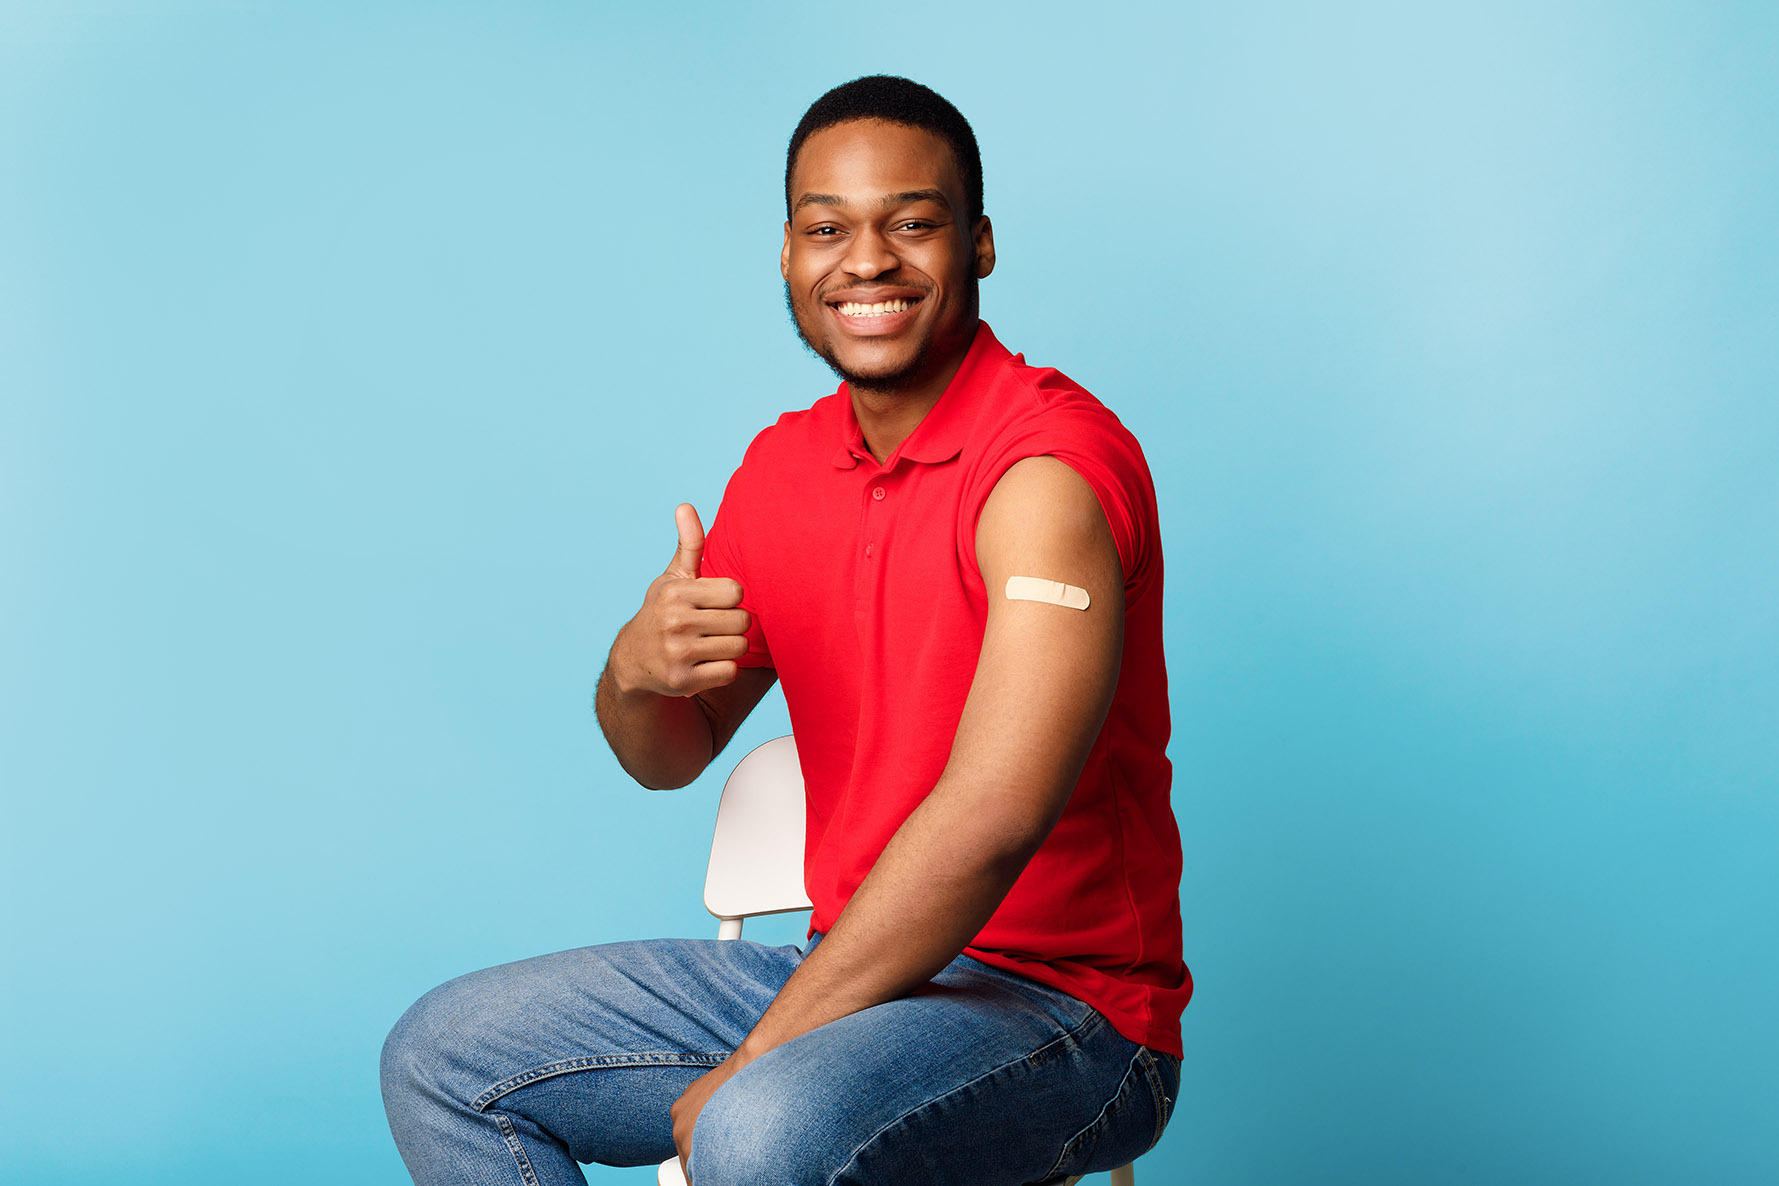 Man Smiling with a thumbs up after receiving a vaccine